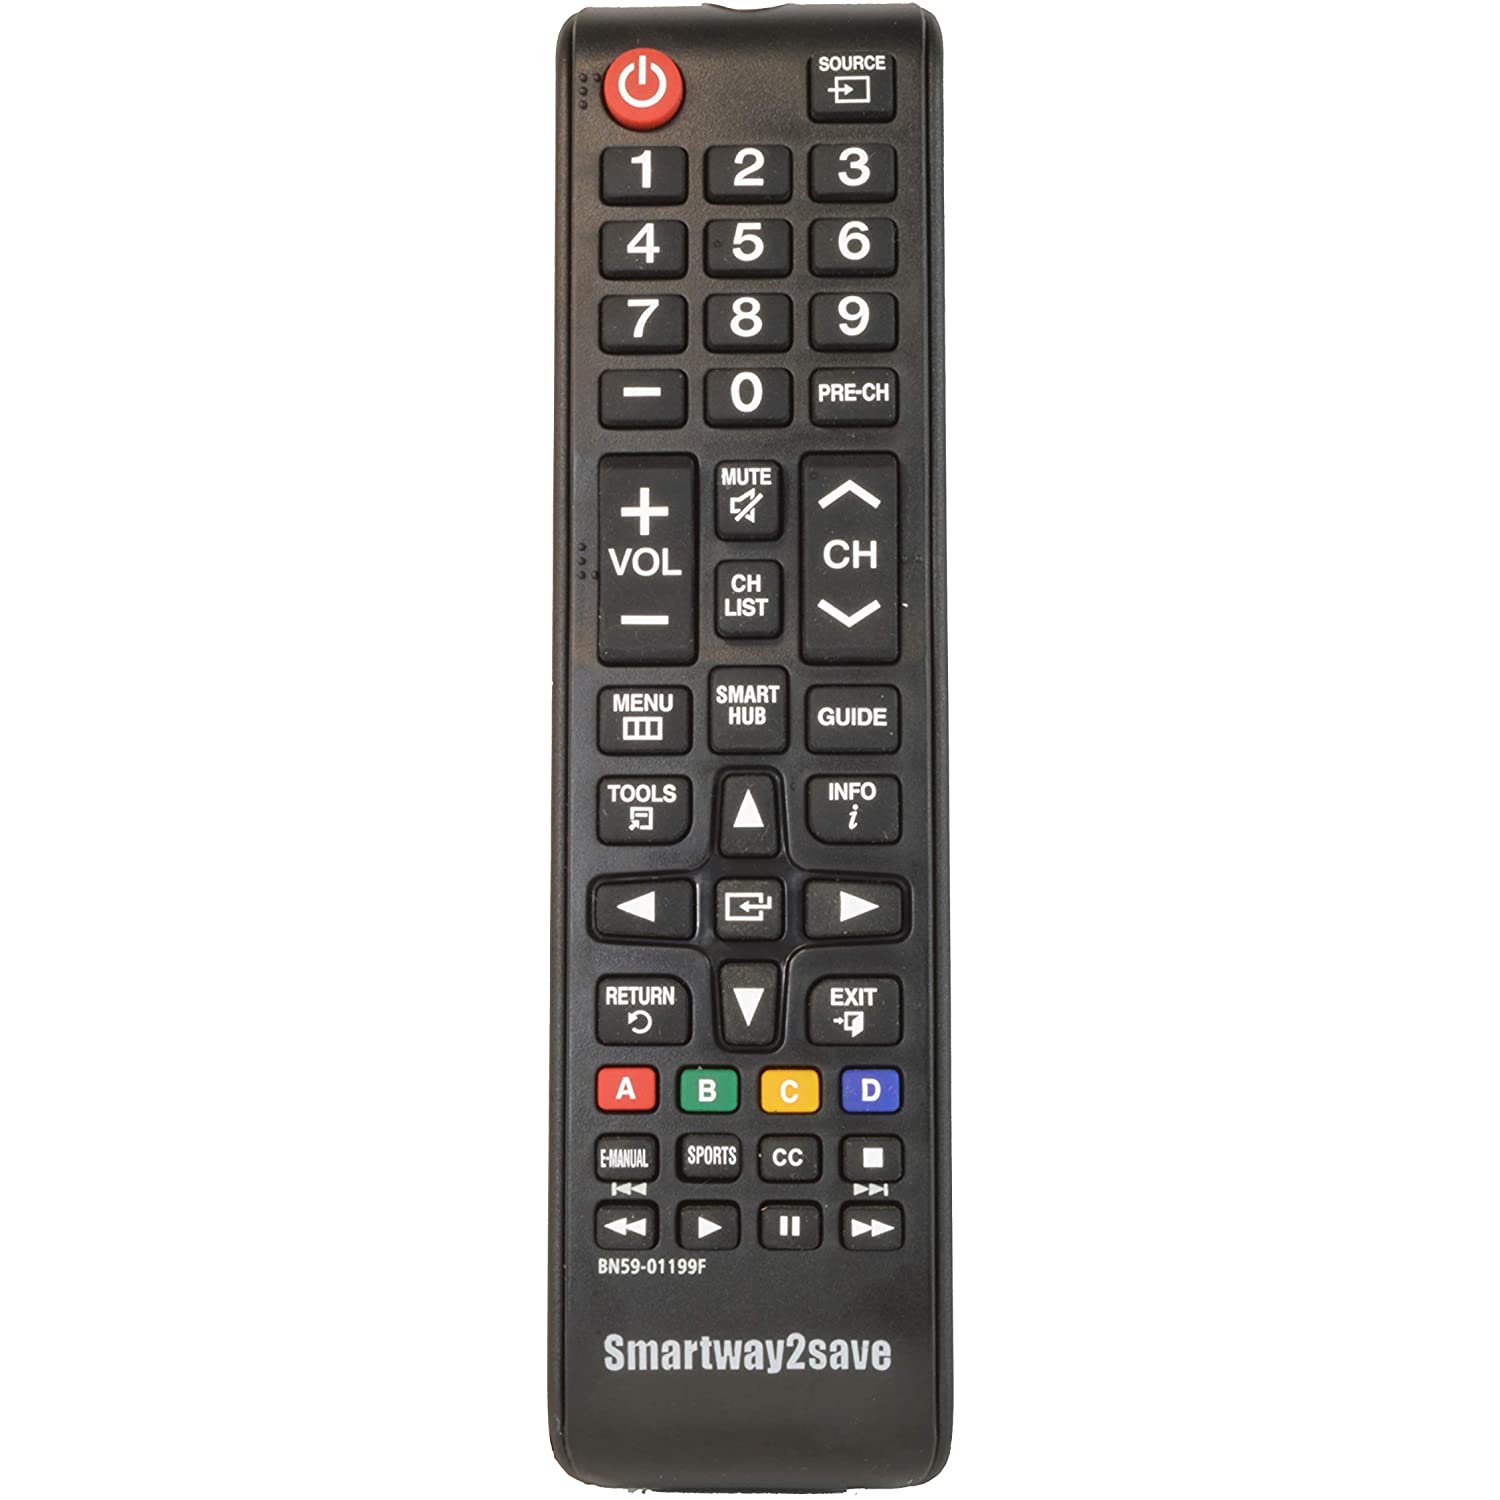 New Replacement Samsung BN59-01199F TV Remote Control.